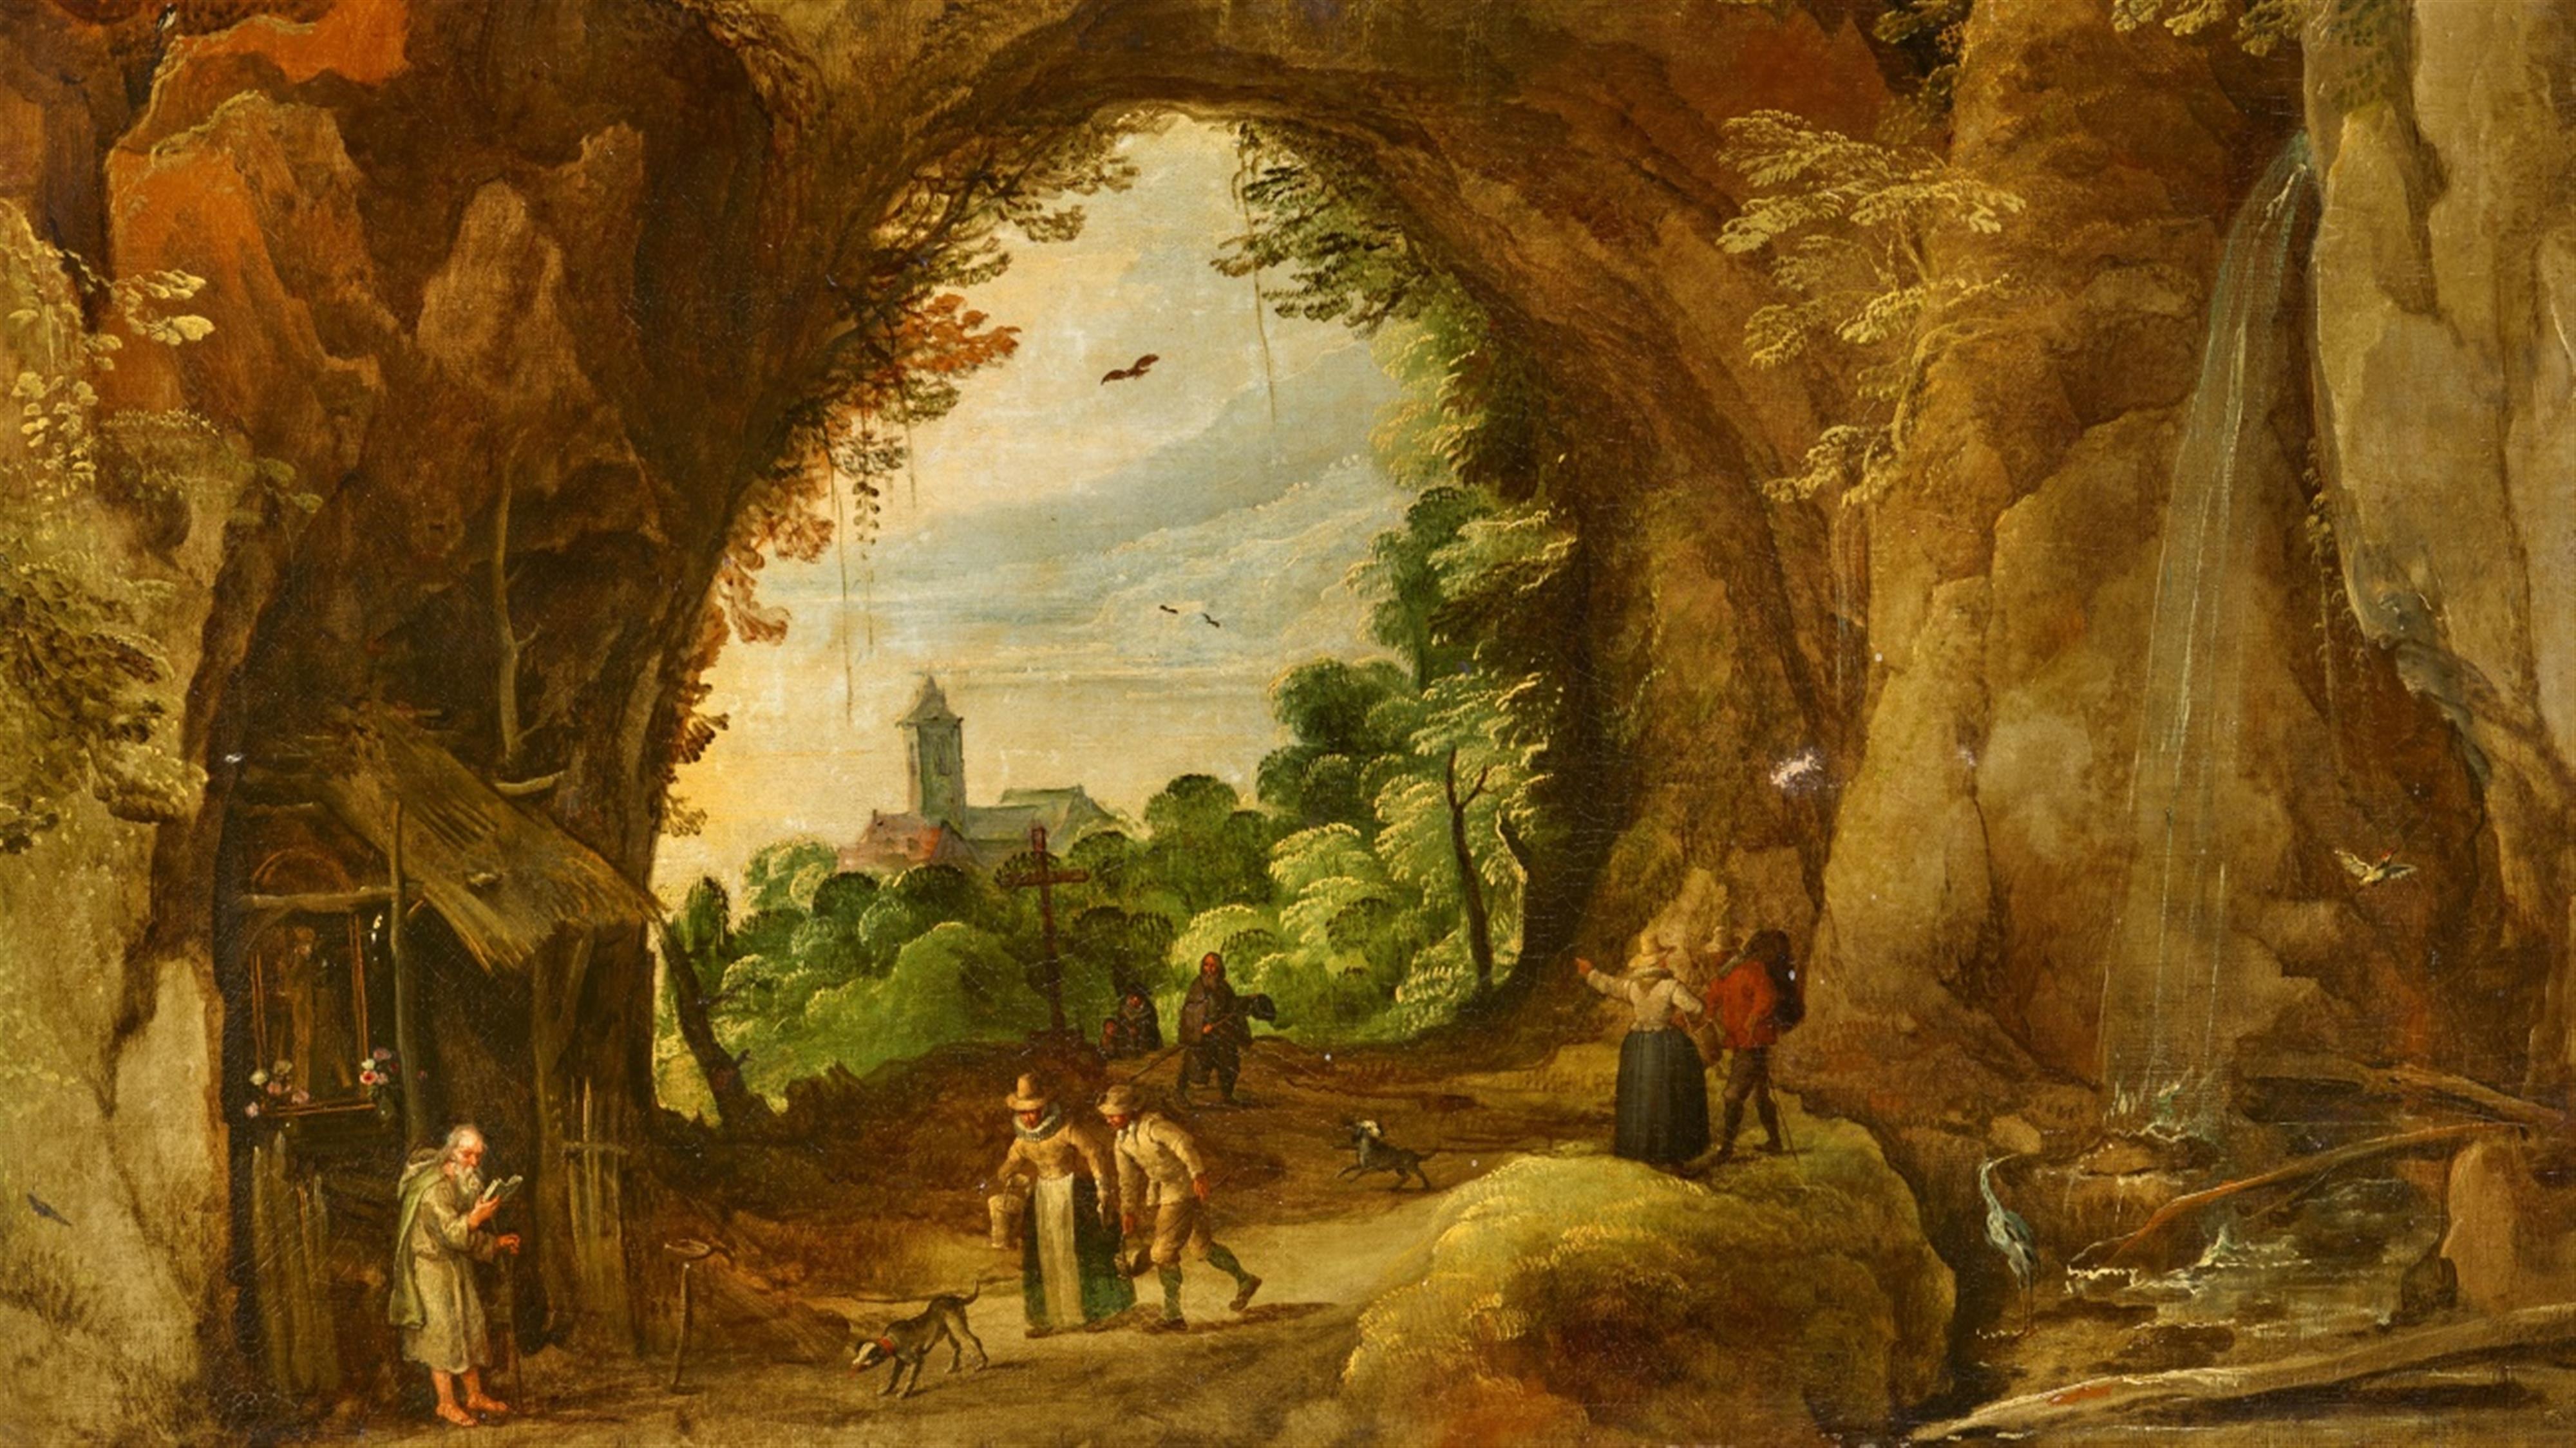 Joos de Momper
Jan Brueghel the Younger - Grotto Landscape with a Hermitage - image-1